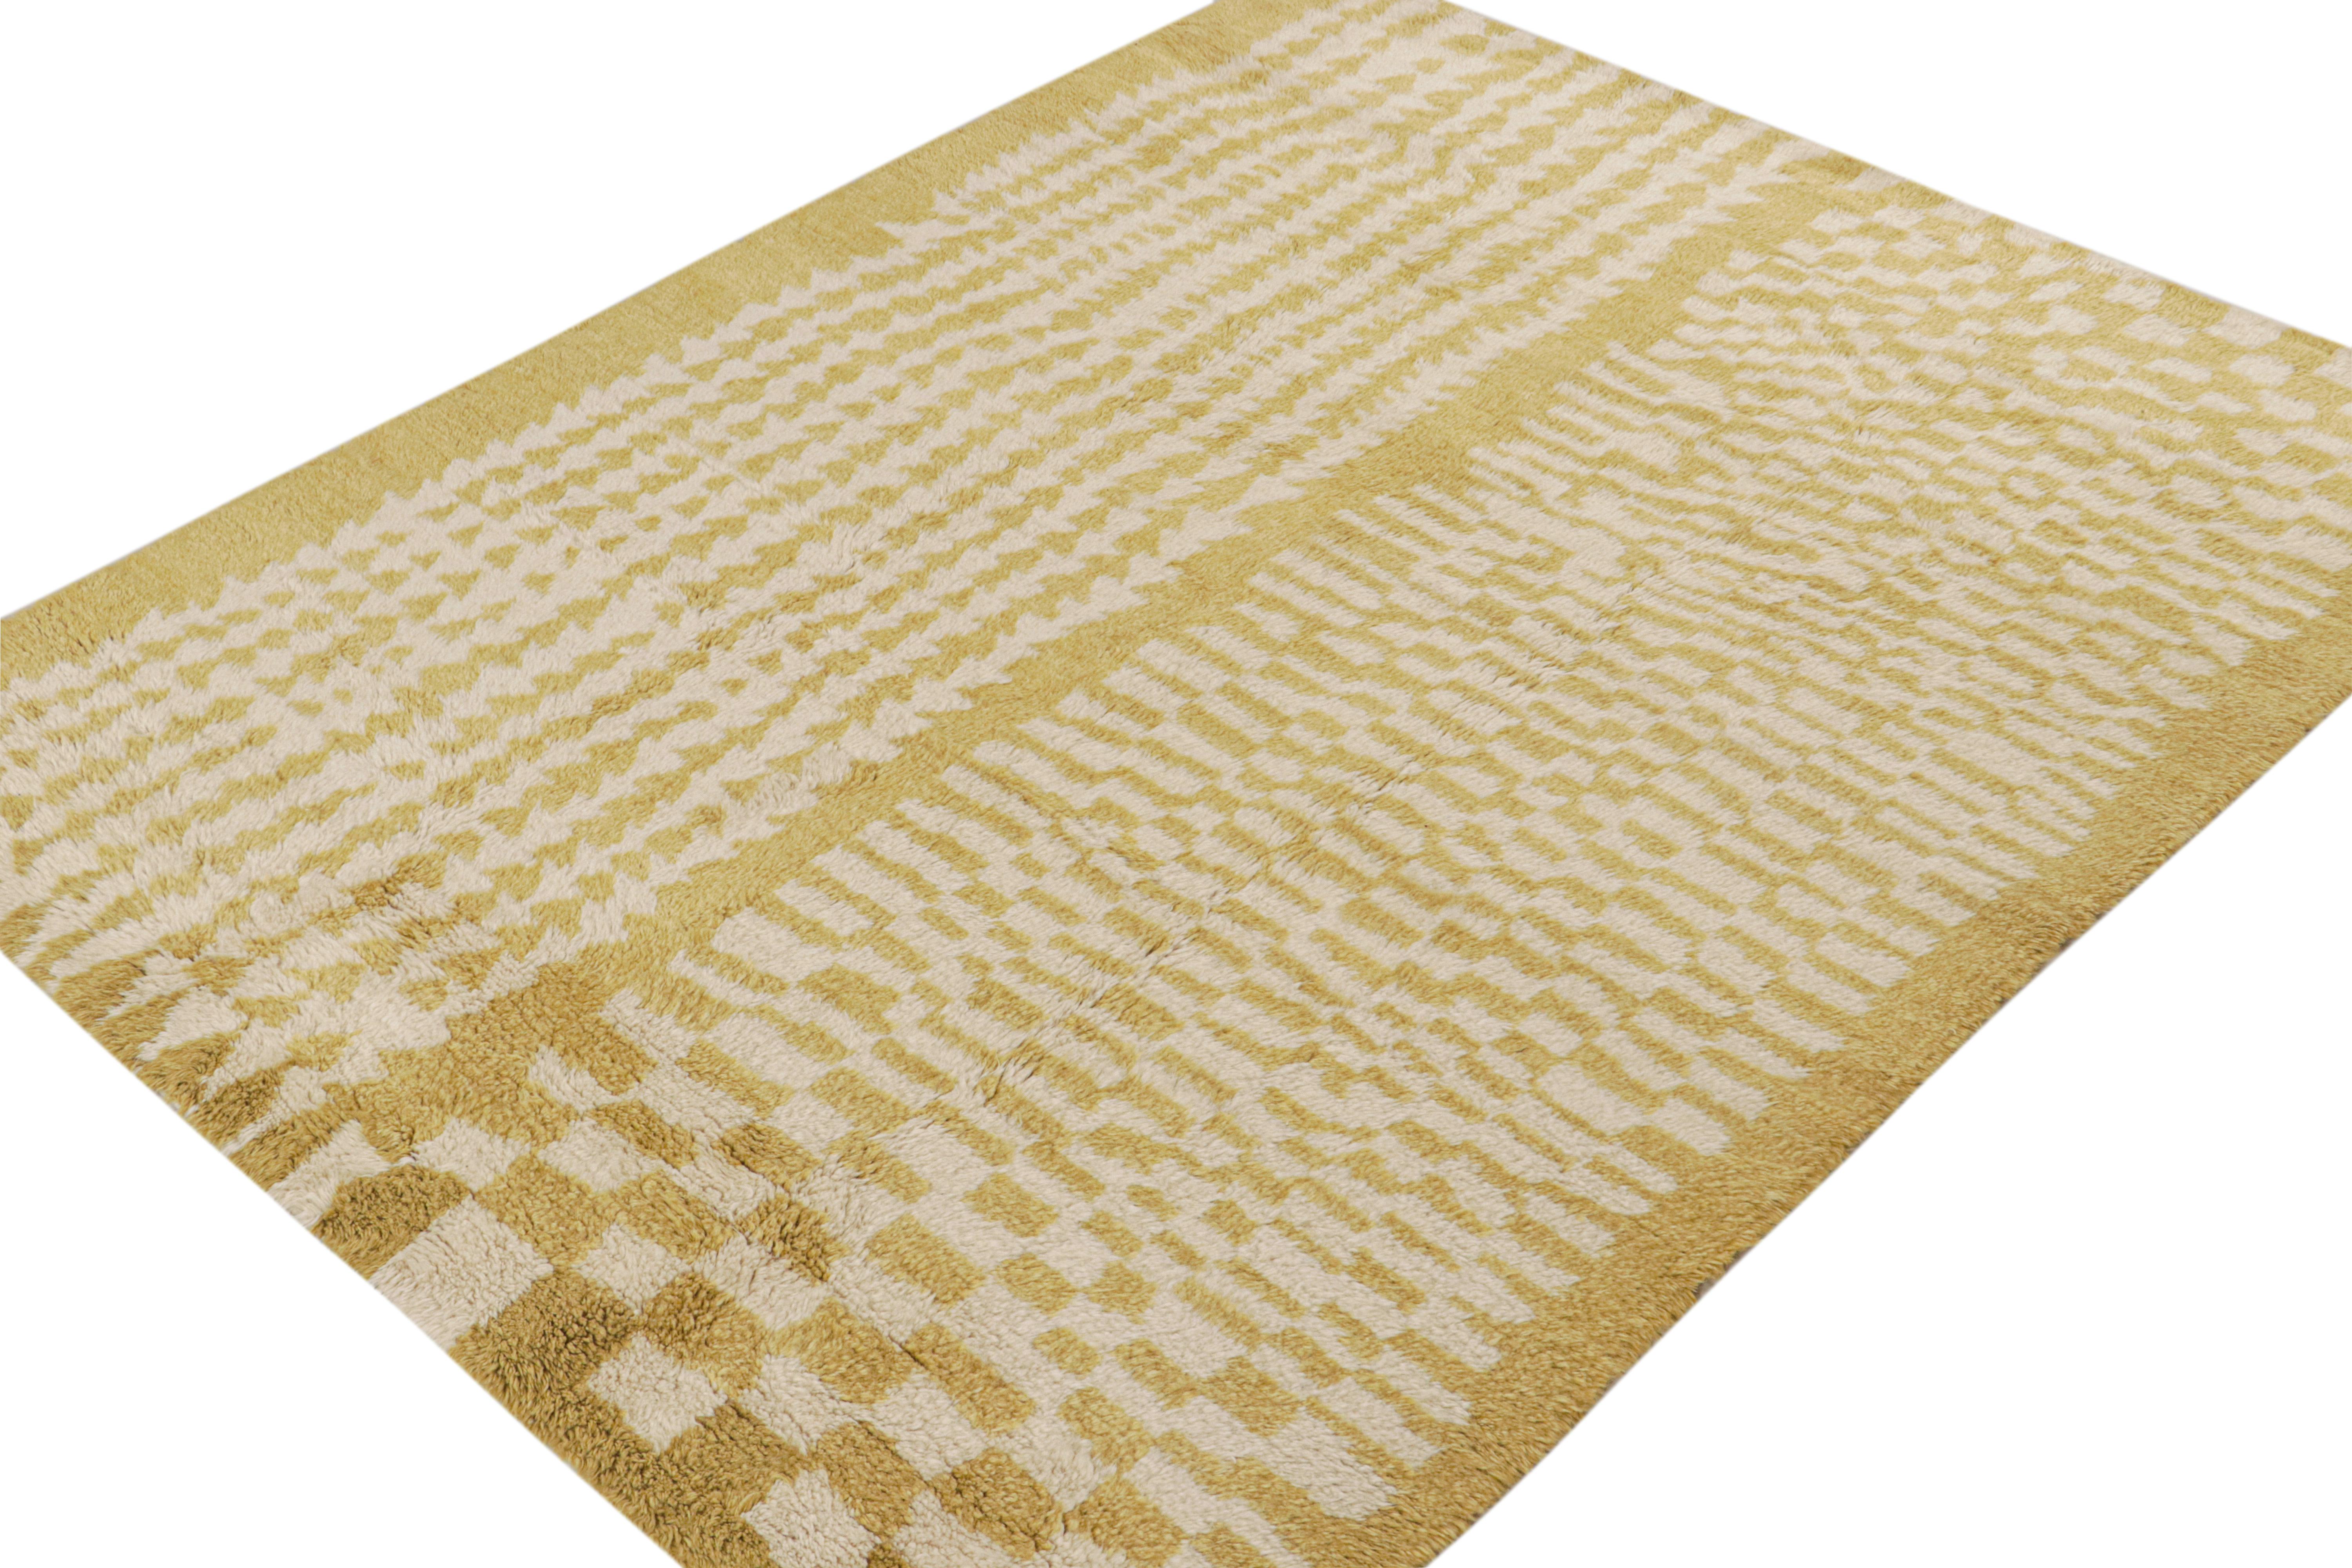 Indian Rug & Kilim’s Moroccan Style Rug in Gold & White Geometric Pattern, High Pile For Sale